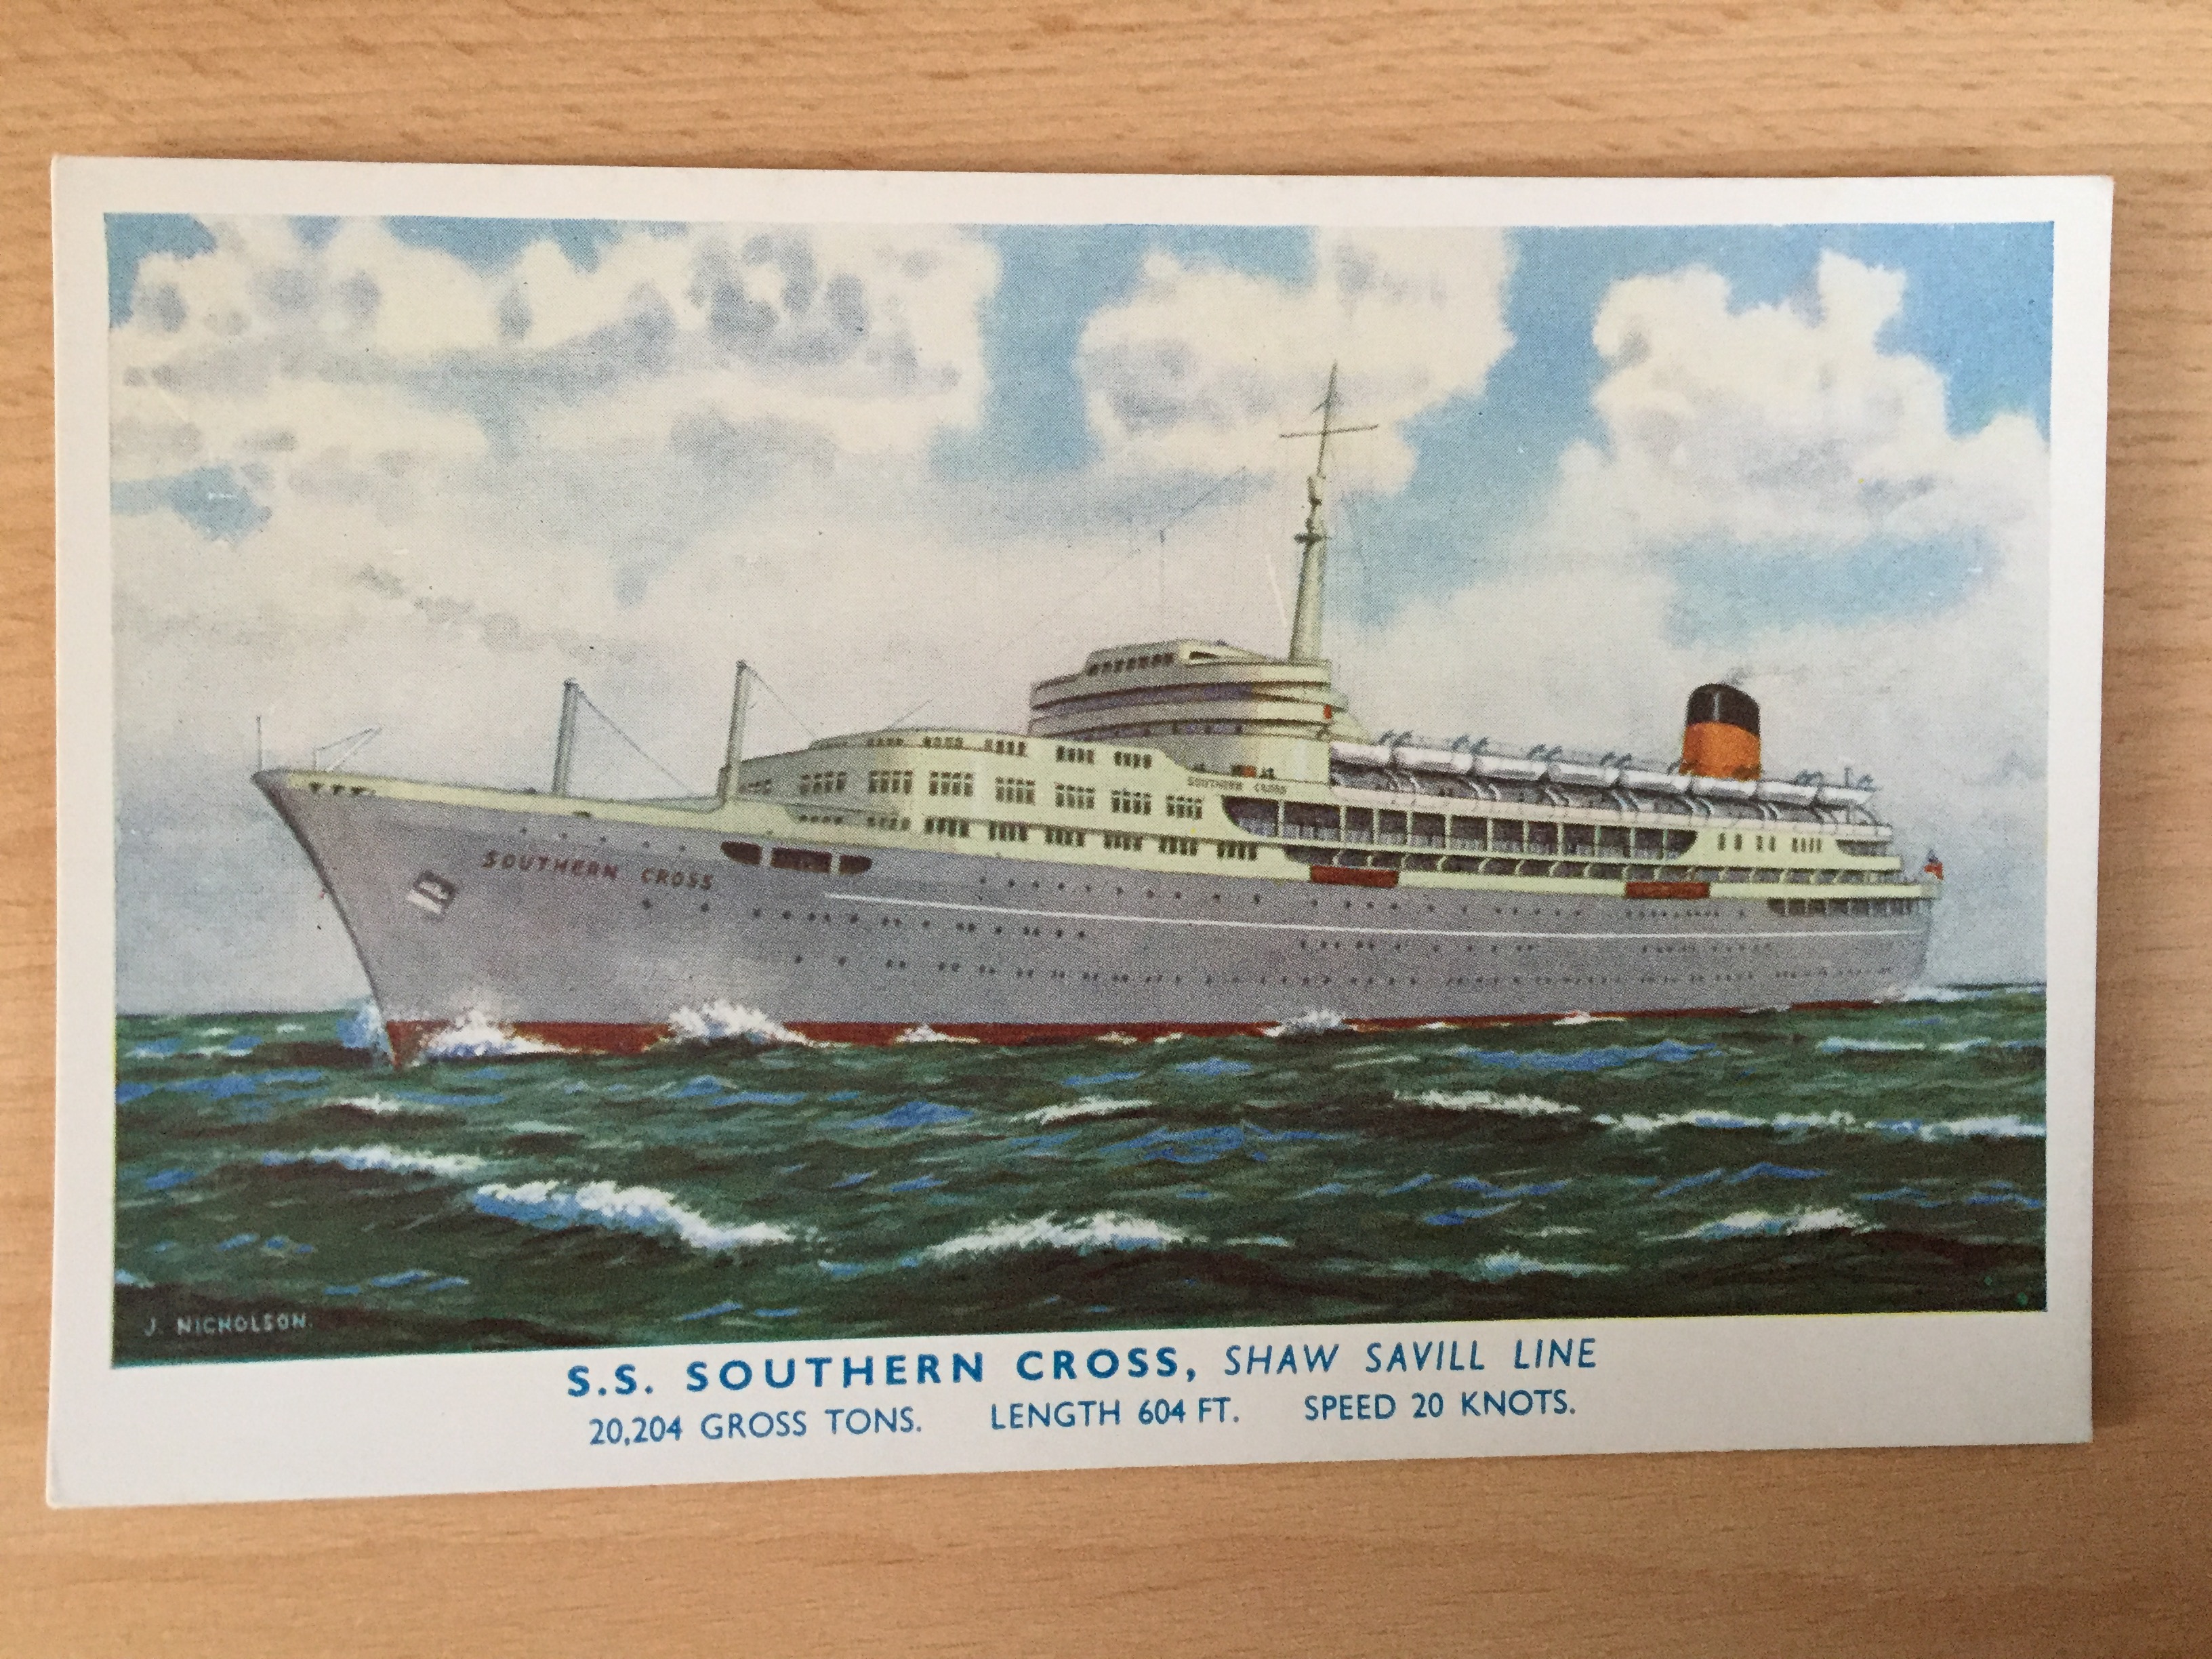 UNUSED COLOUR POSTCARD FROM THE SS SOUTHERN CROSS OF THE SHAW SAVILL LINE